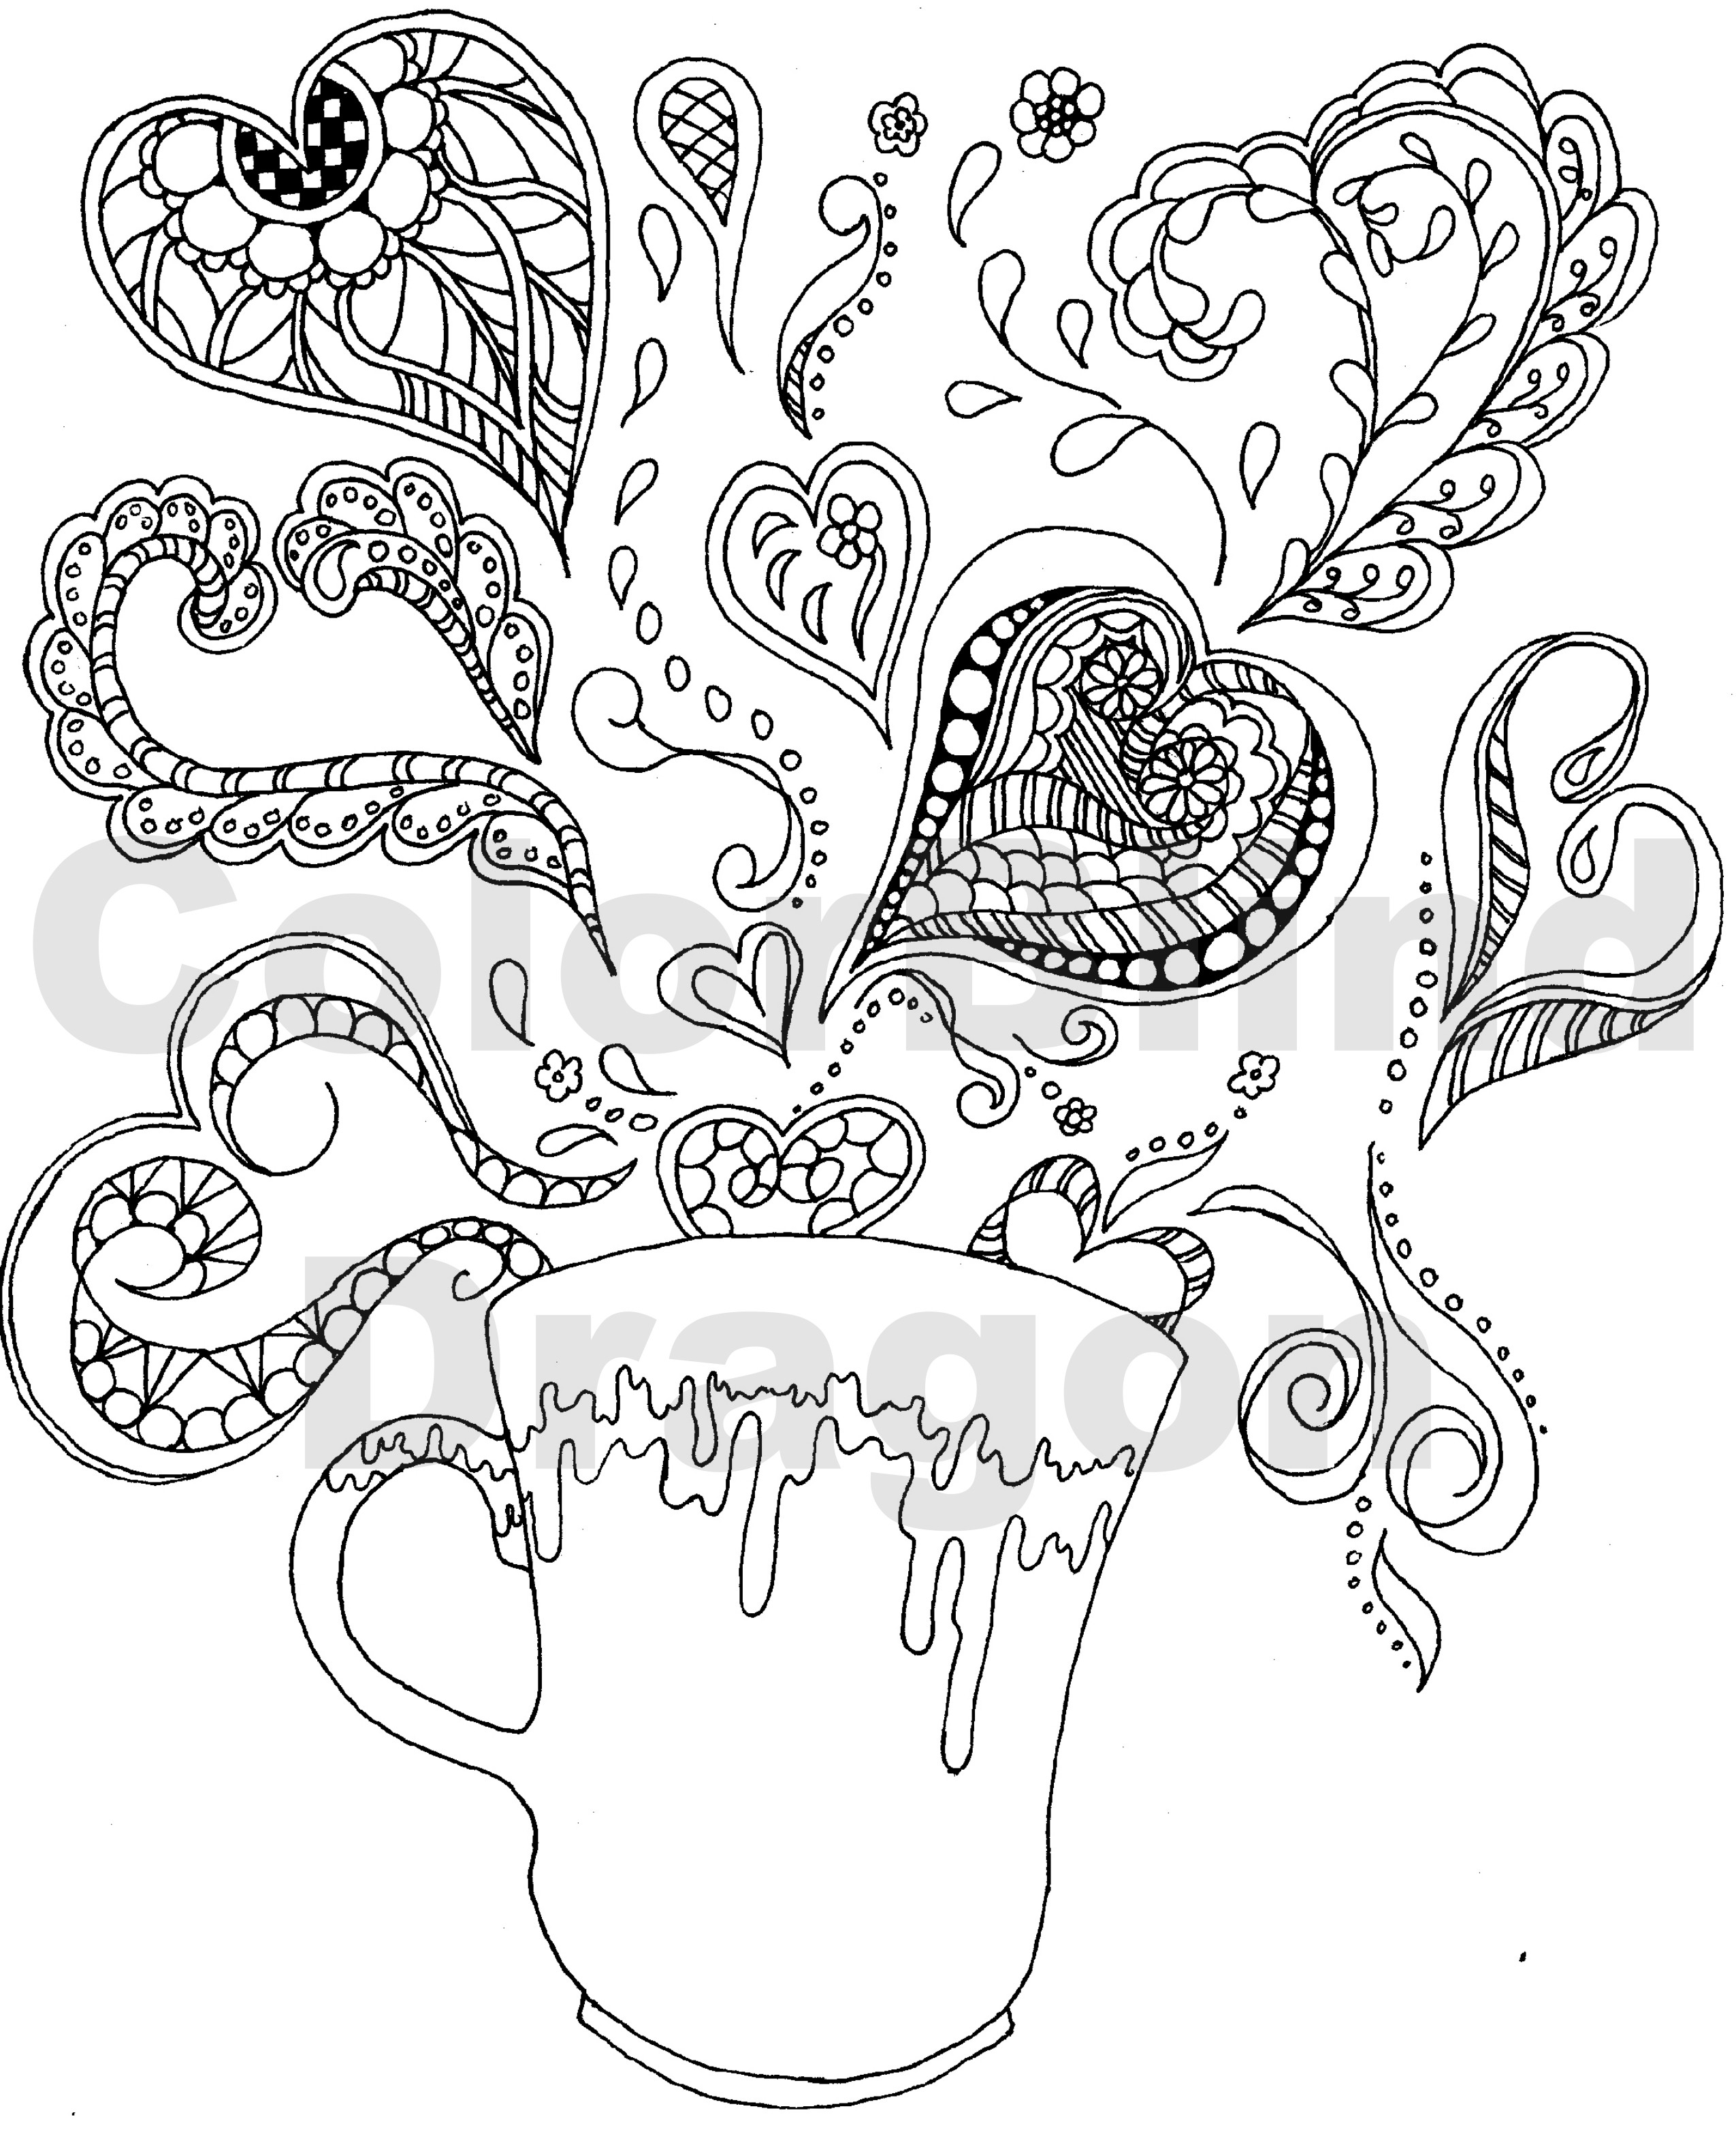 Coloring Pages For Adults Love
 Adult Coloring Pages Love Gallery Free Coloring Books